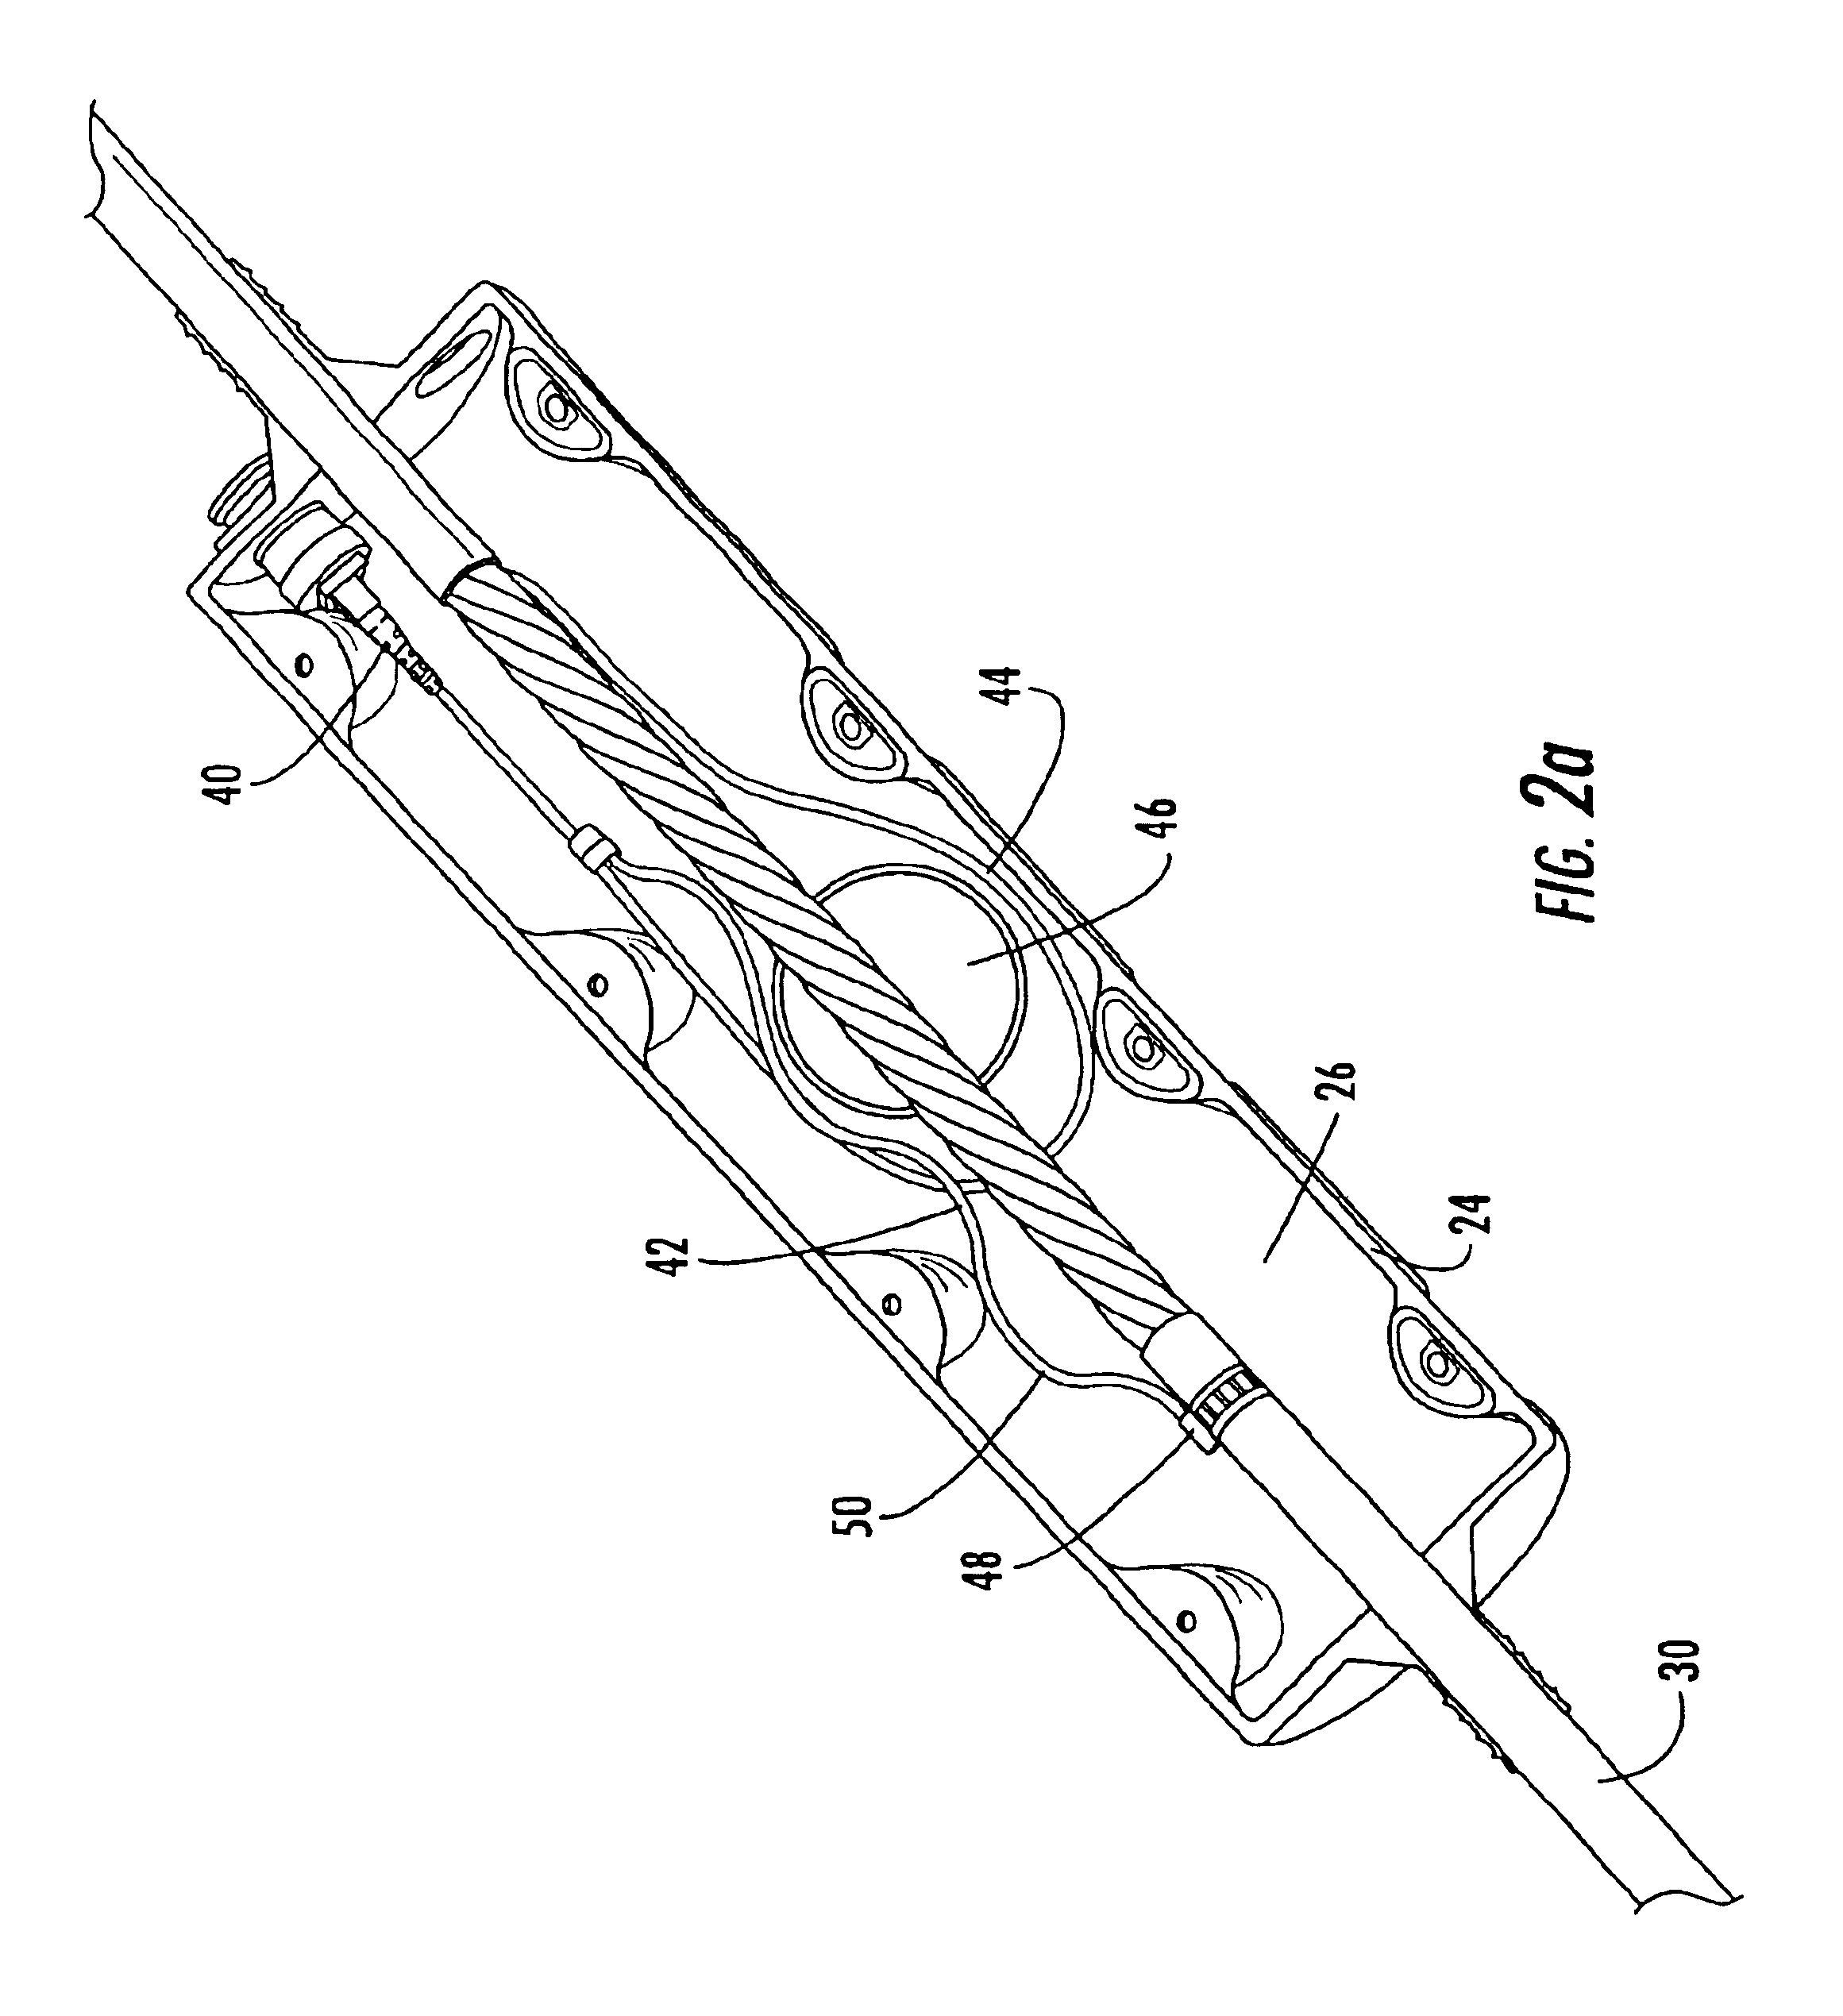 Interconnection enclosure having a connector port and preterminated optical connector